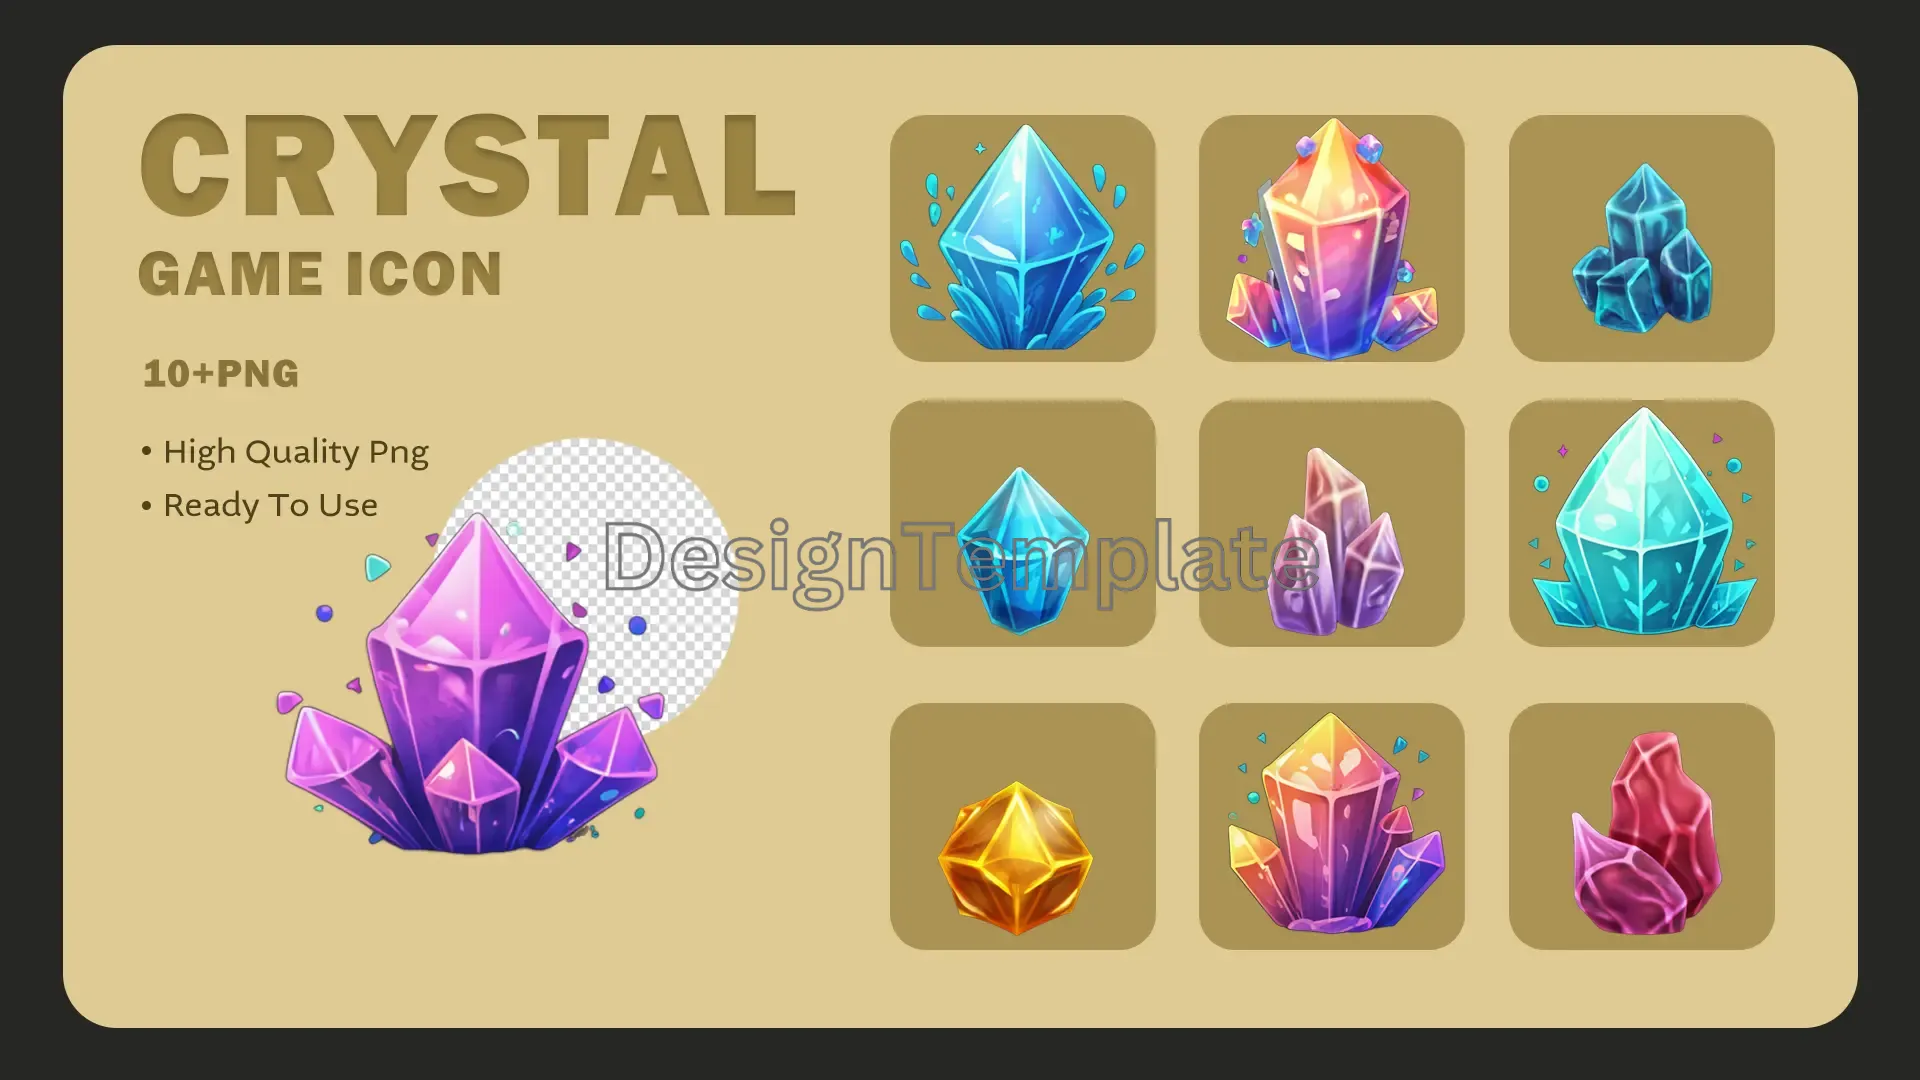 Royal Crystals Regal 3D Game Icons Collection image